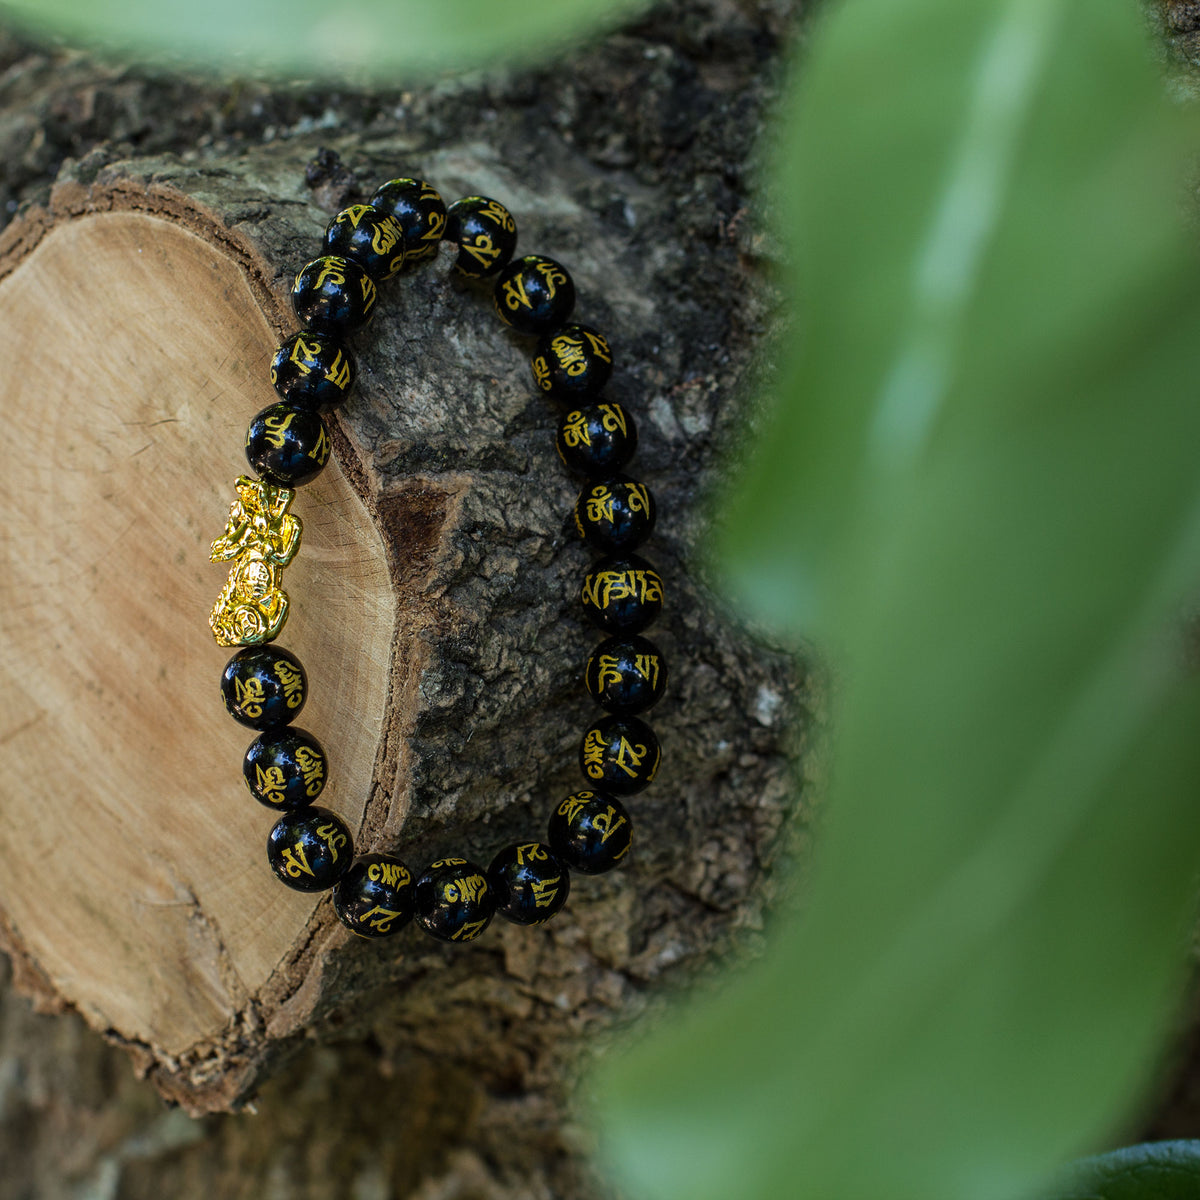 The Feng Shui Bracelet 10mm - “The way of the wind and water” Feng meaning “wind” and Shui meaning “water” emphasizes on flow and stems from the Taoist belief in chi “ your life force, the energy that flows through you and through everything”